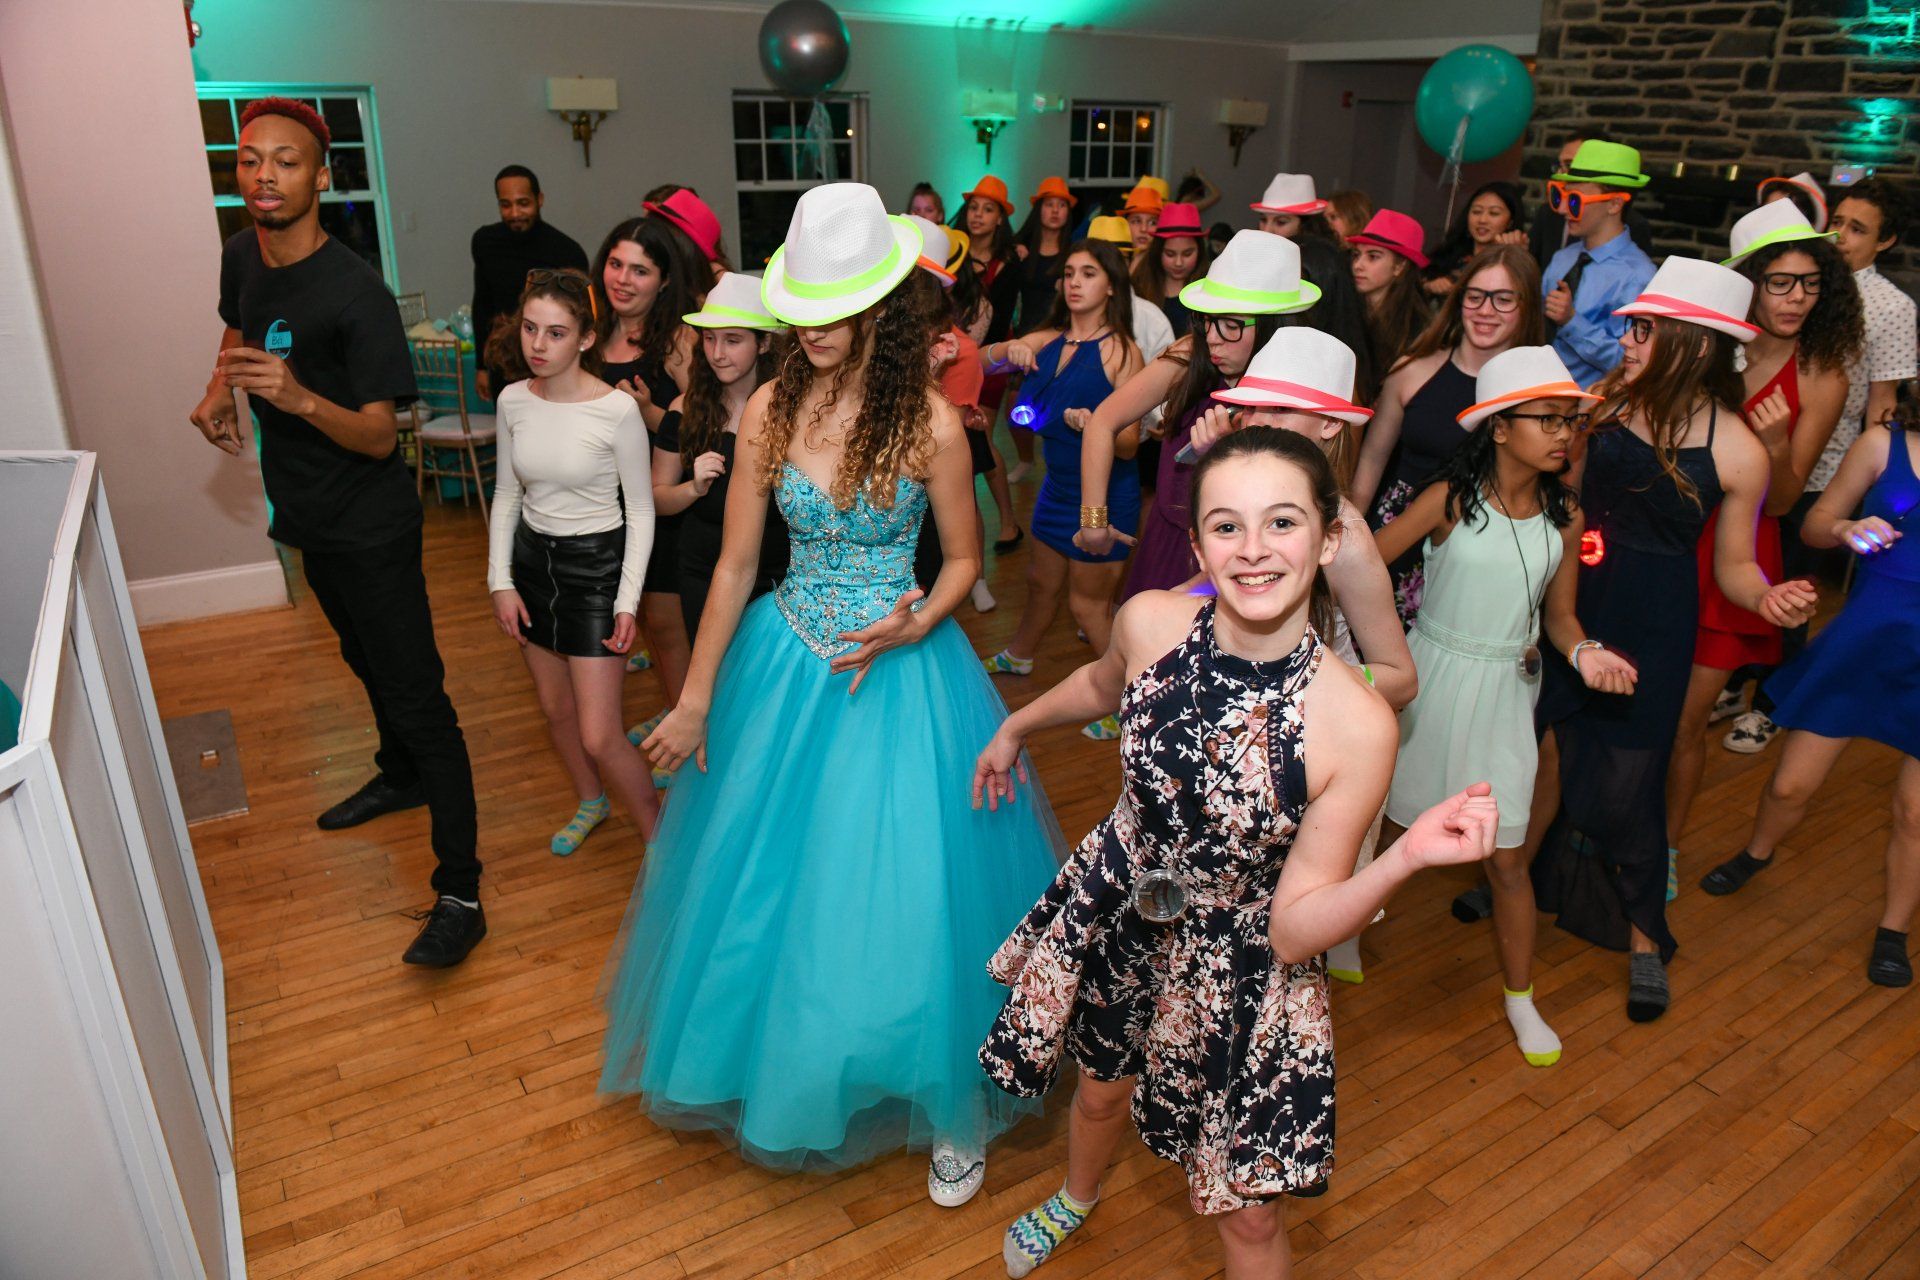 Bat Mitzvah party with everyone on dance floor